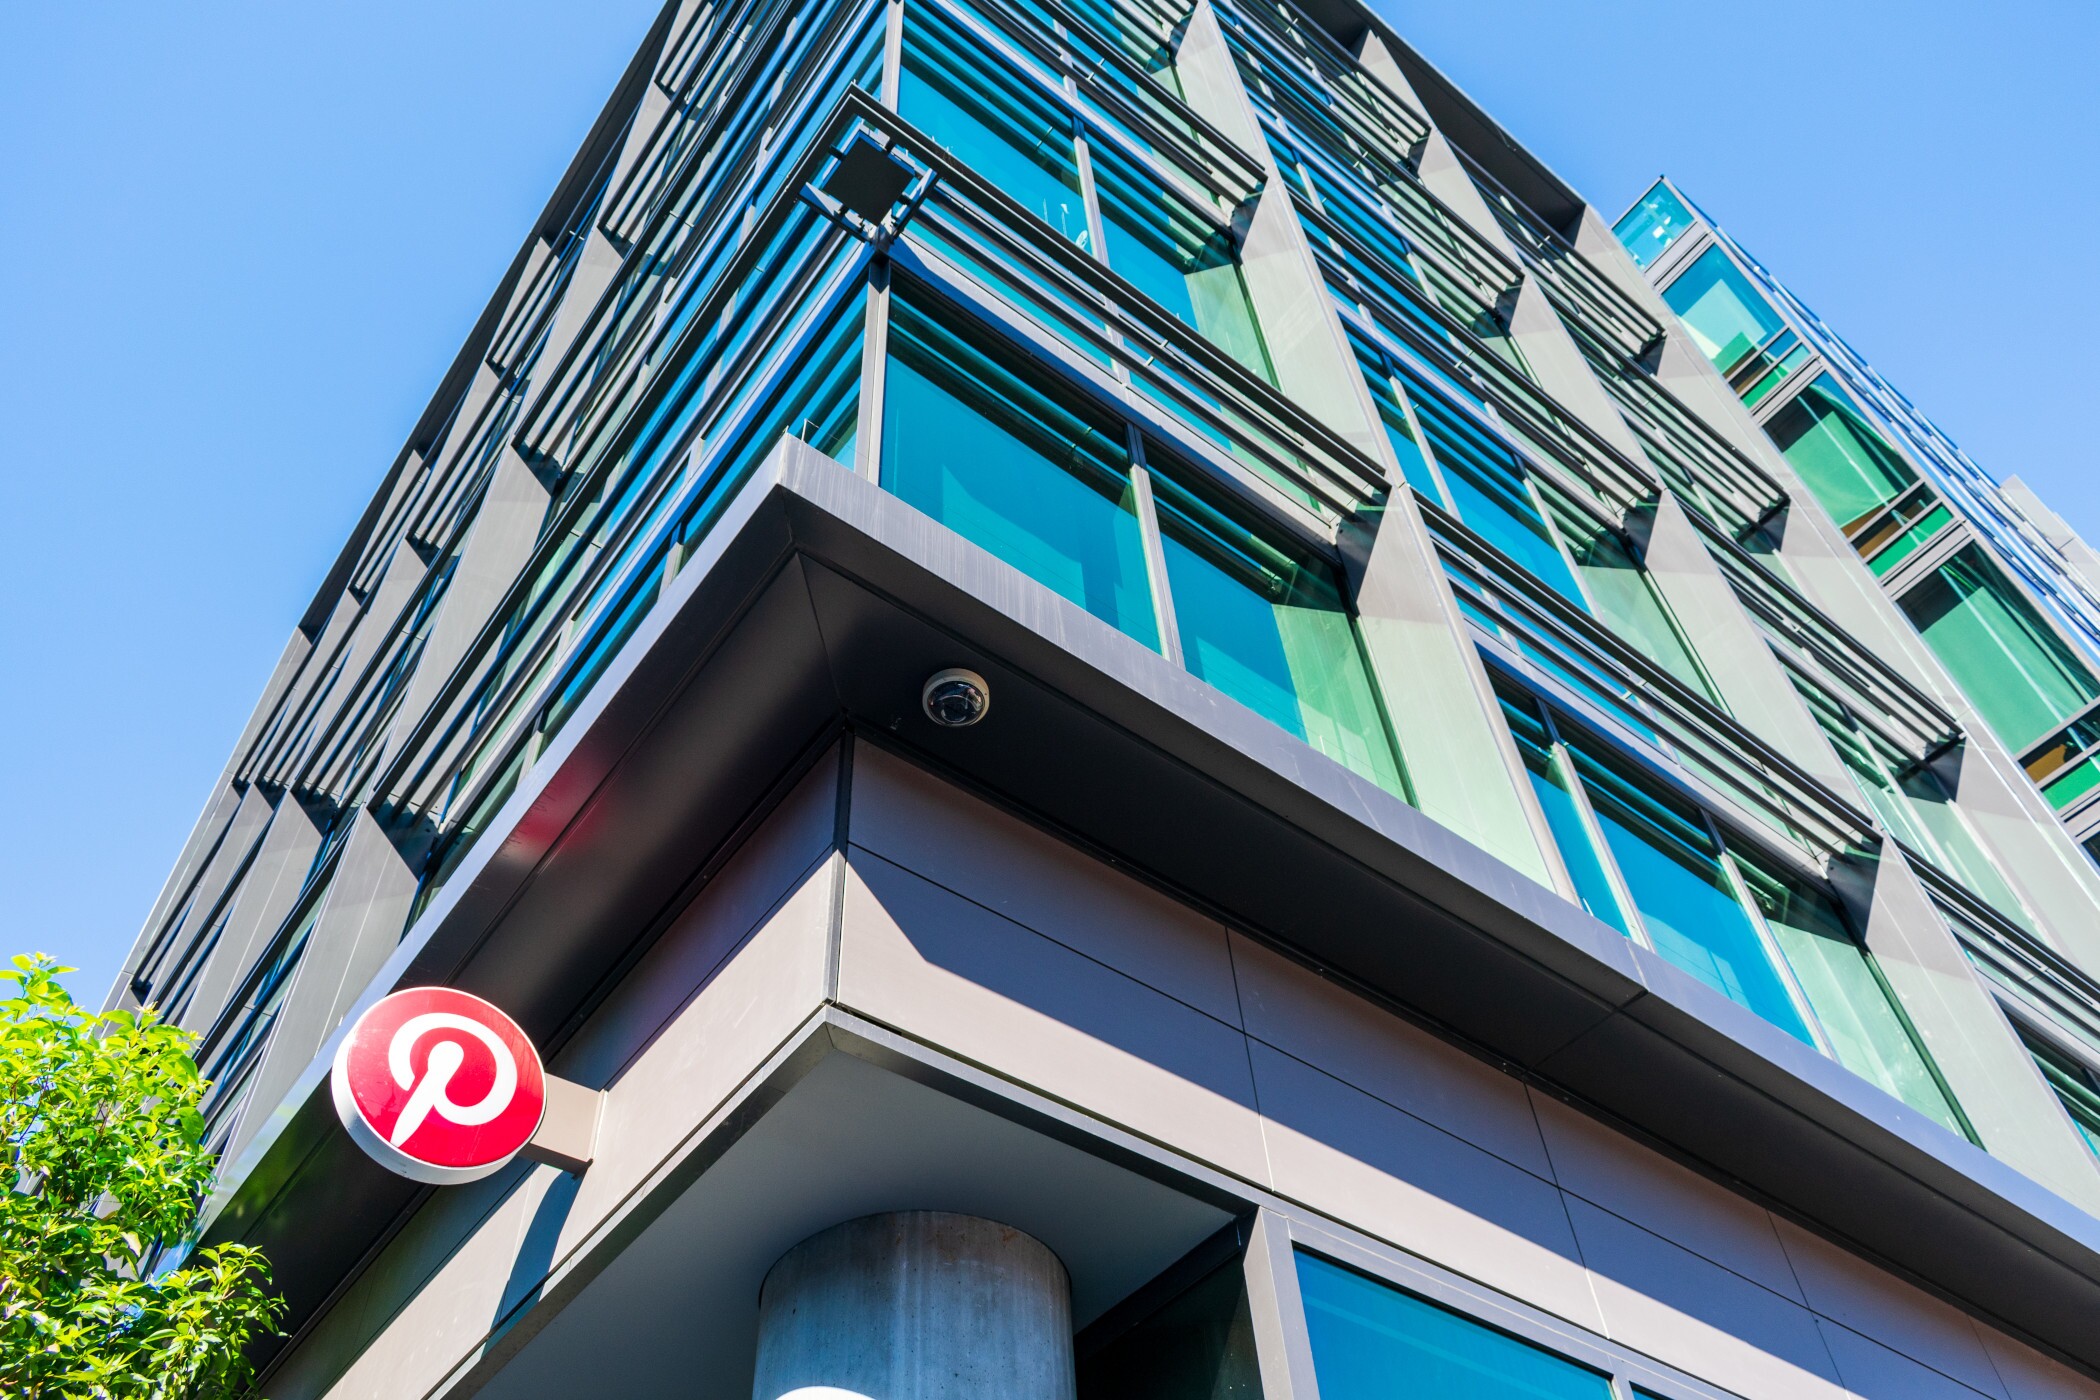 San Francisco-based Pinterest is planning to terminate its lease at 505 Brannan St. (Getty Images)